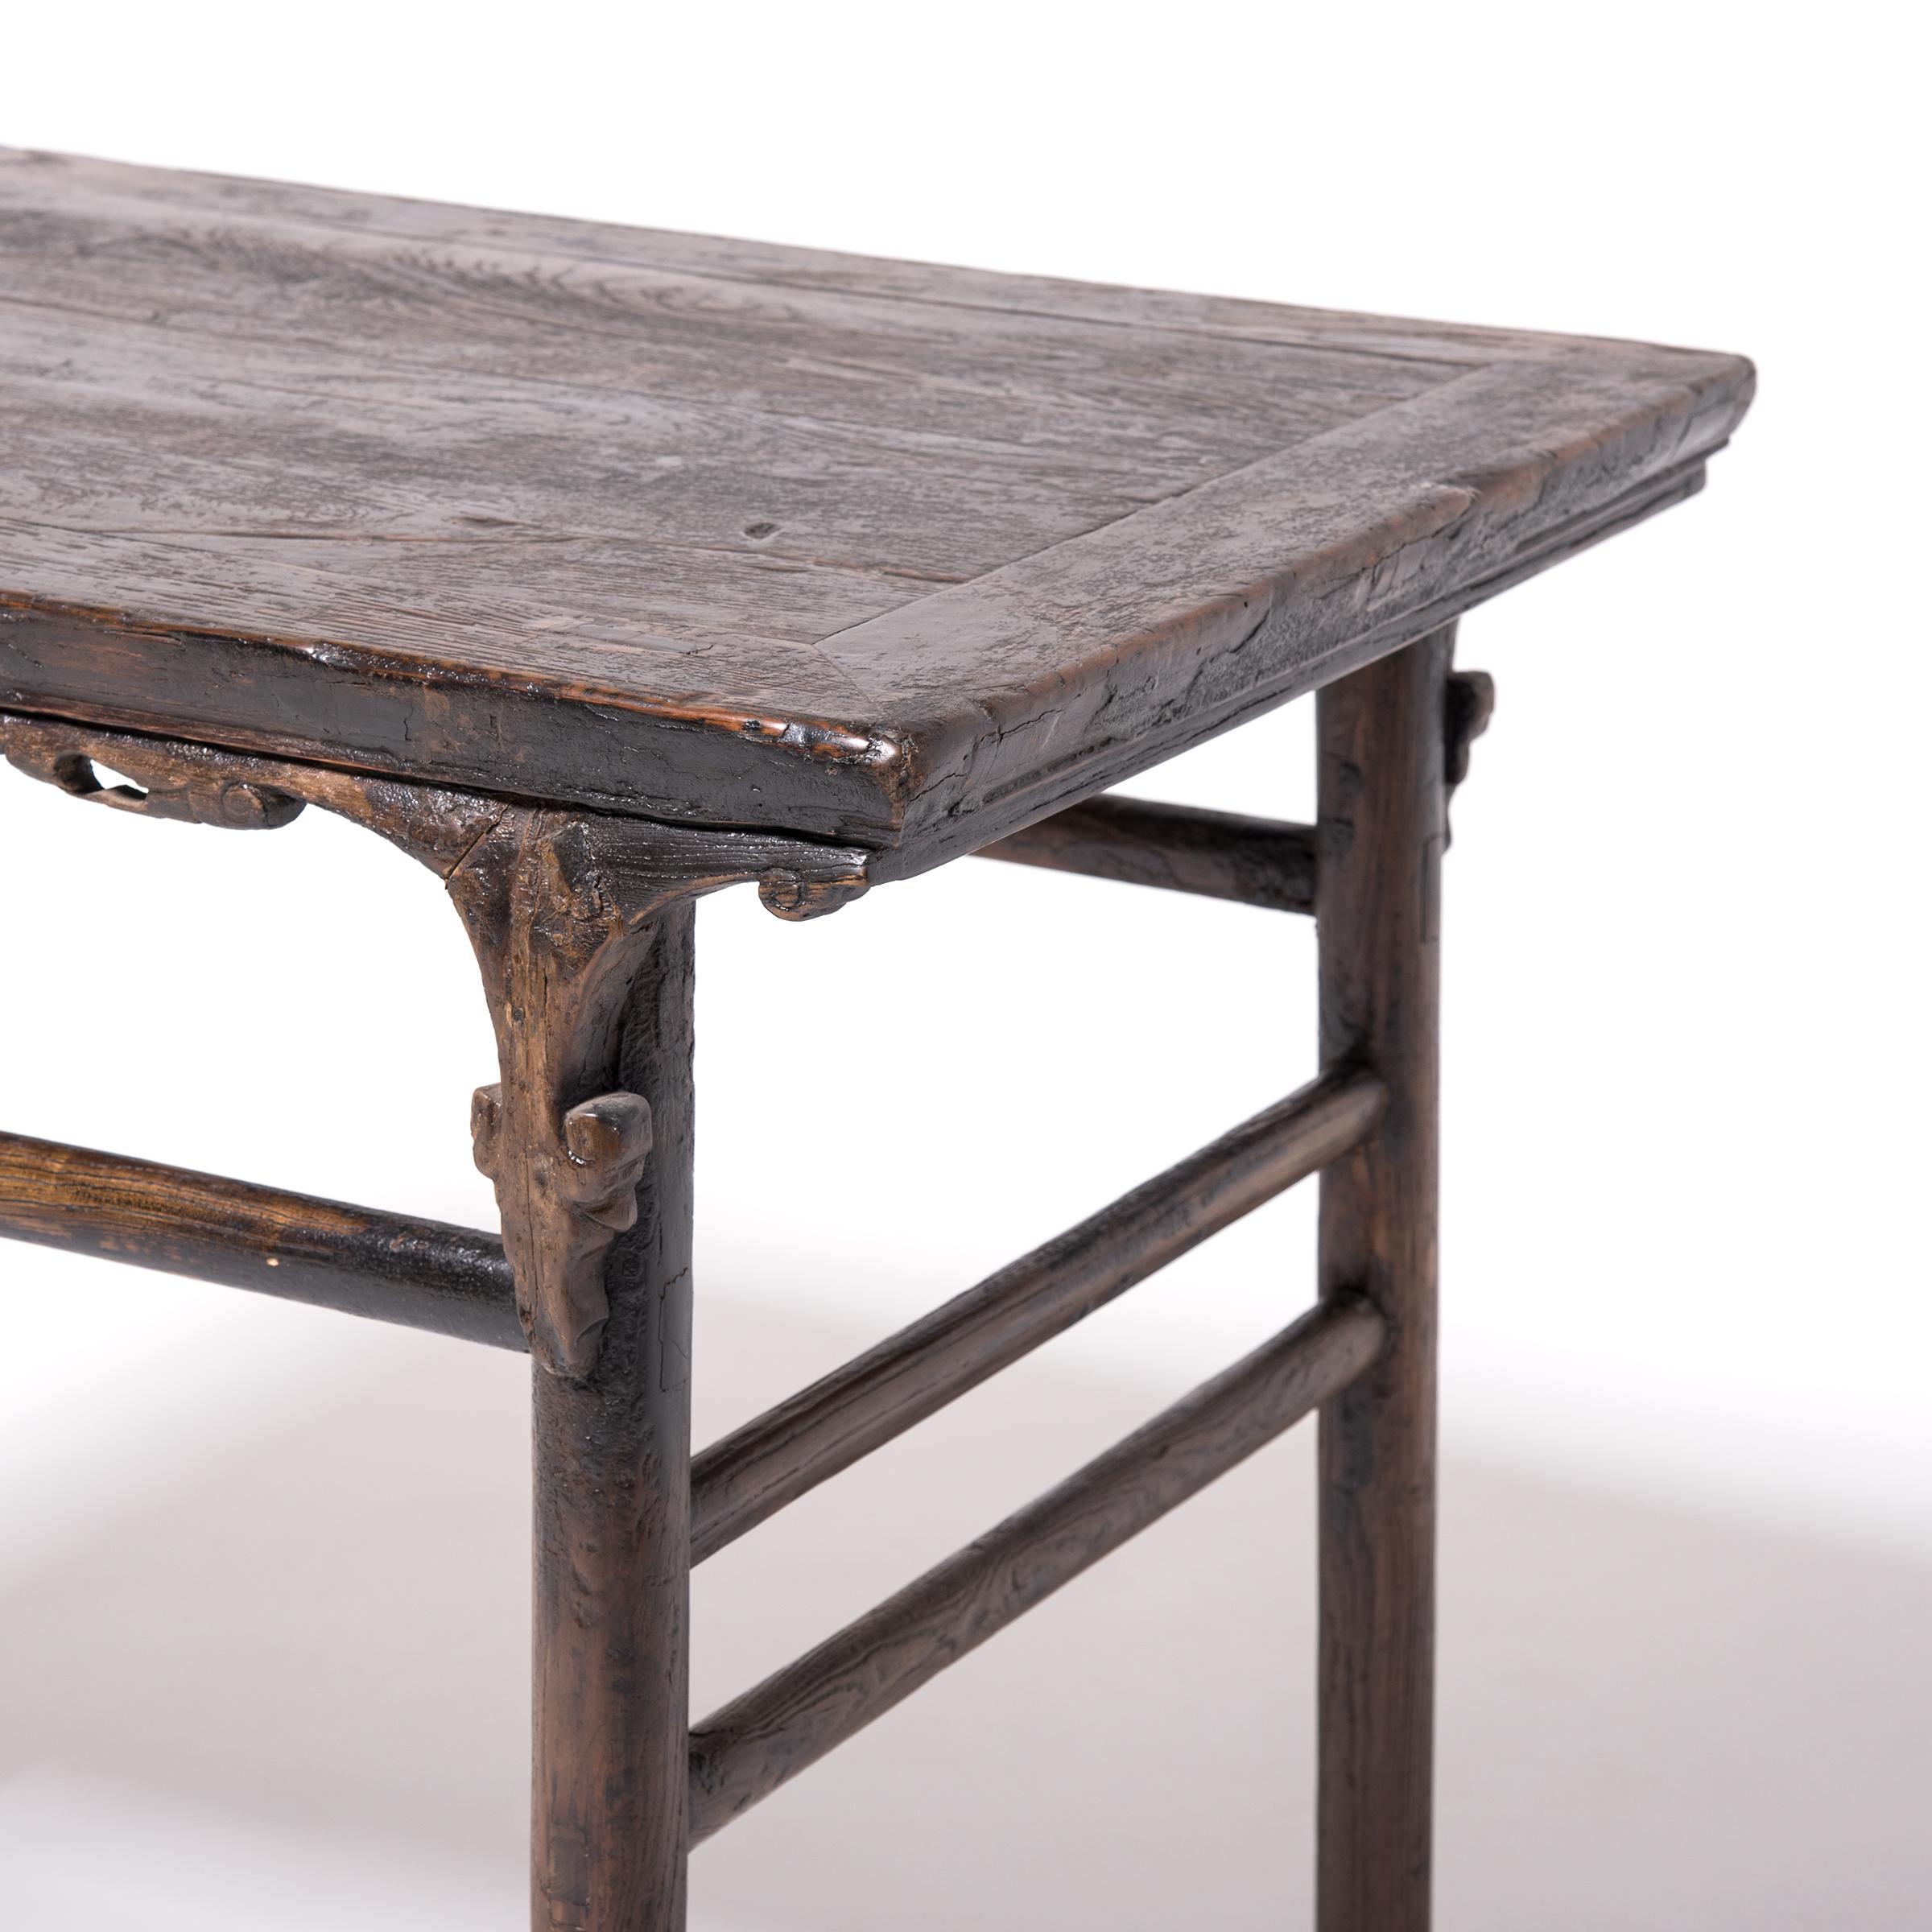 Elm Chinese Ruyi Wine Table, c. 1800 For Sale